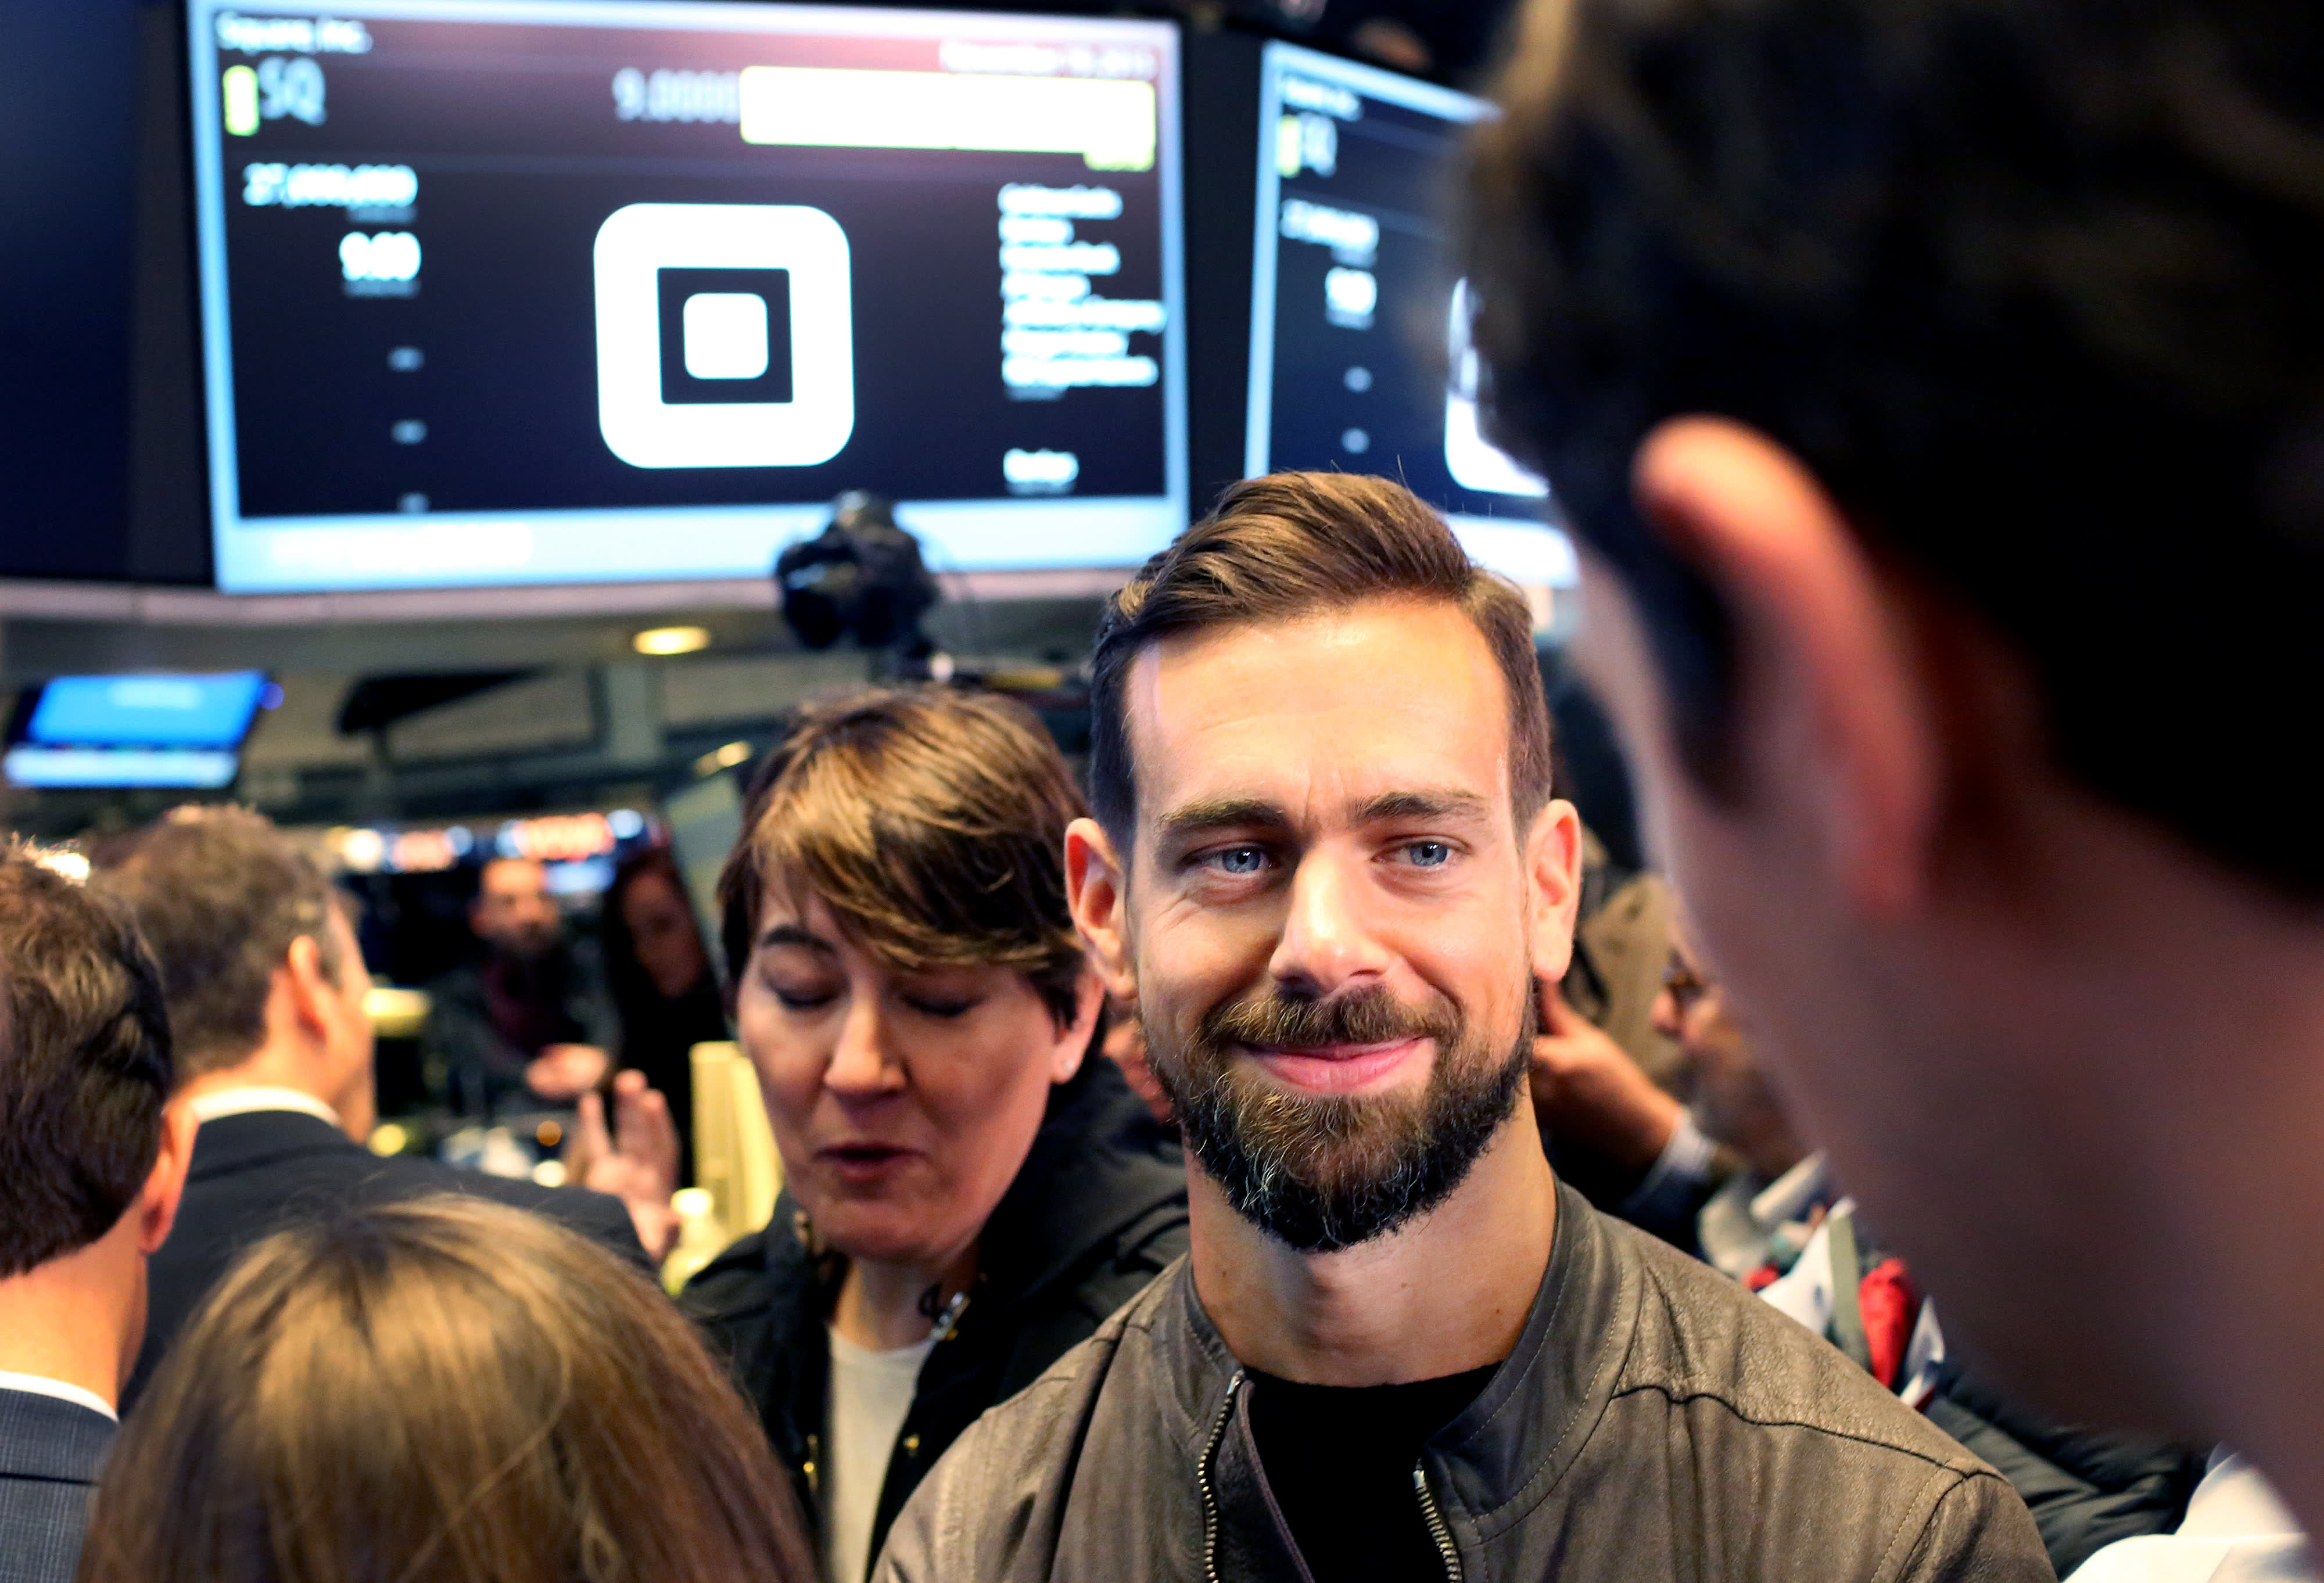 Square shares jump out after Jack Dorsey’s company launches its own bank